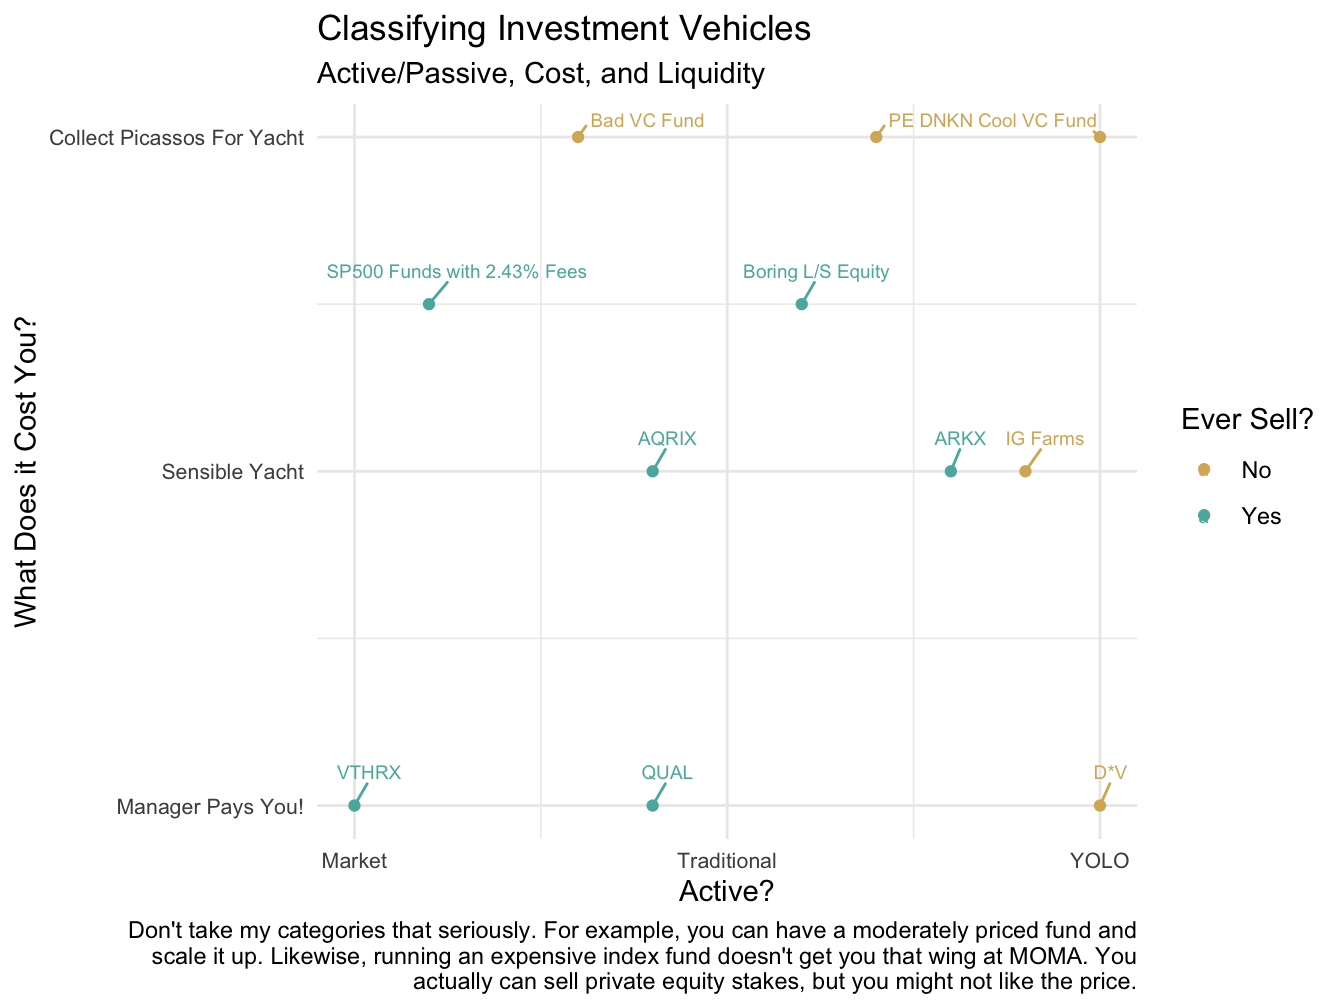 An Essentially Made Up But Kind of Still Accurate Way of Categorizing Investments